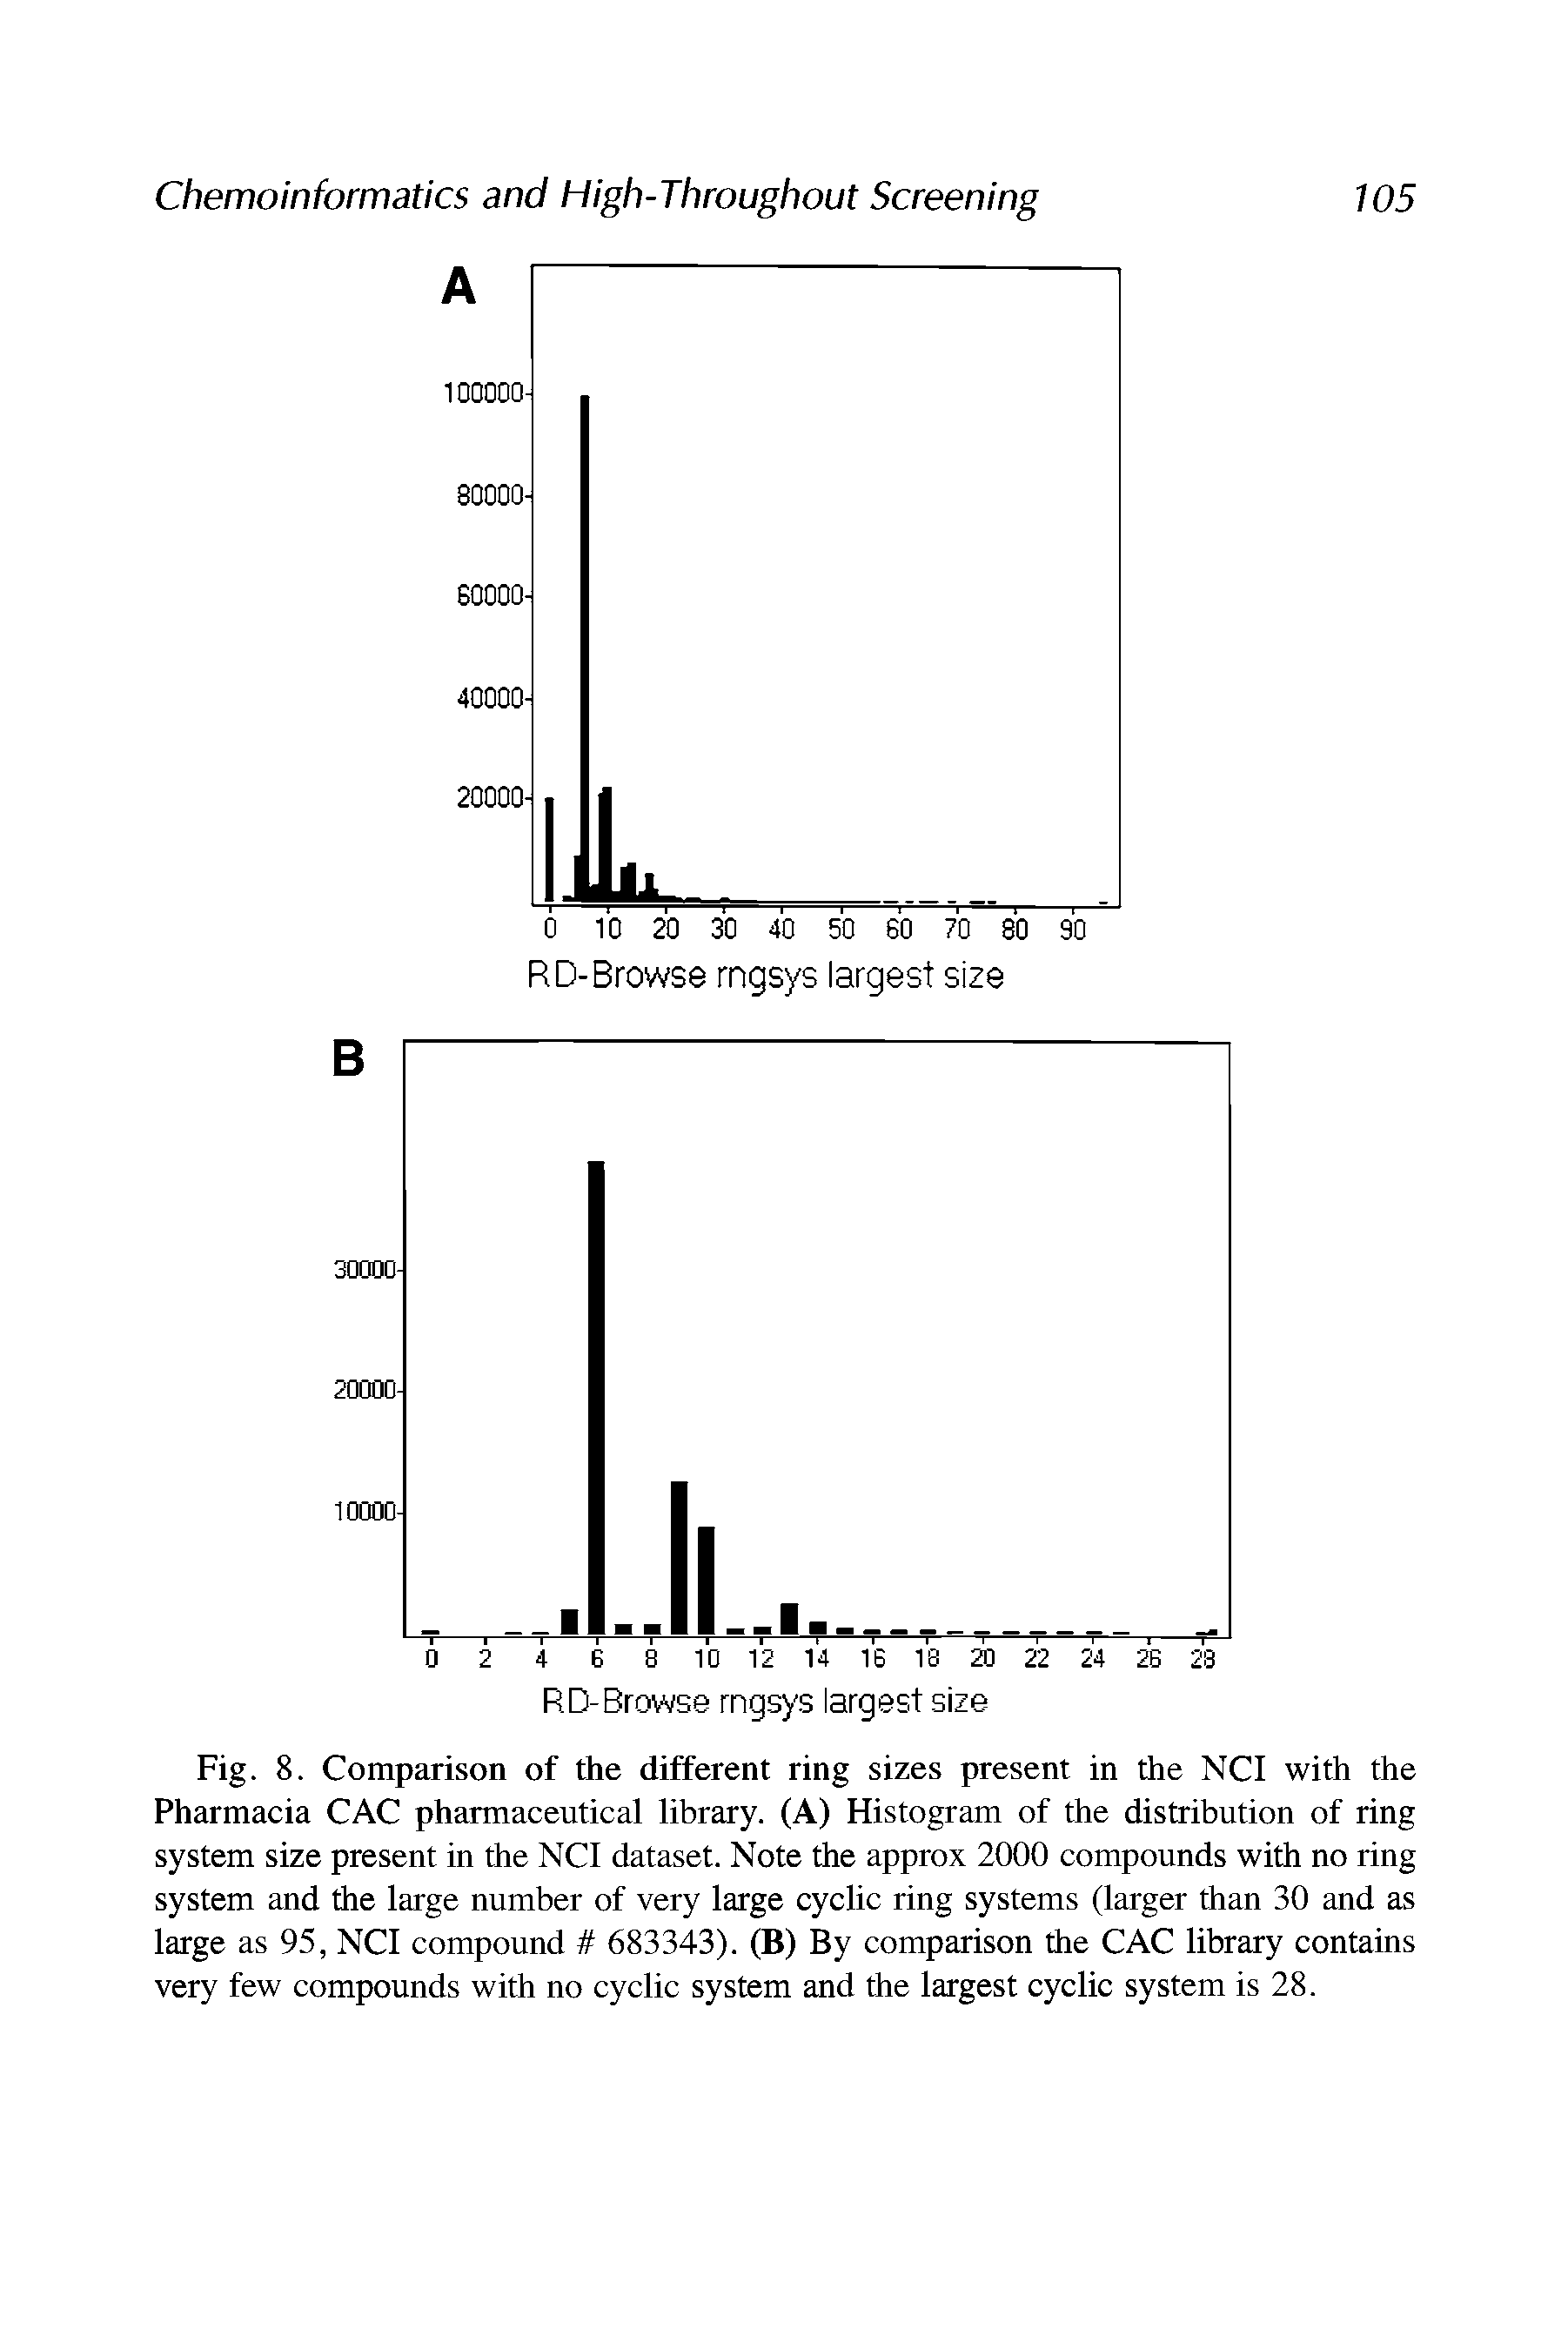 Fig. 8. Comparison of the different ring sizes present in the NCI with the Pharmacia CAC pharmaceutical library. (A) Histogram of the distribution of ring system size present in the NCI dataset. Note the approx 2000 compounds with no ring system and the large number of very large cyclic ring systems (larger than 30 and as large as 95, NCI compound 683343). (B) By comparison the CAC library contains very few compounds with no cyclic system and the largest cyclic system is 28.